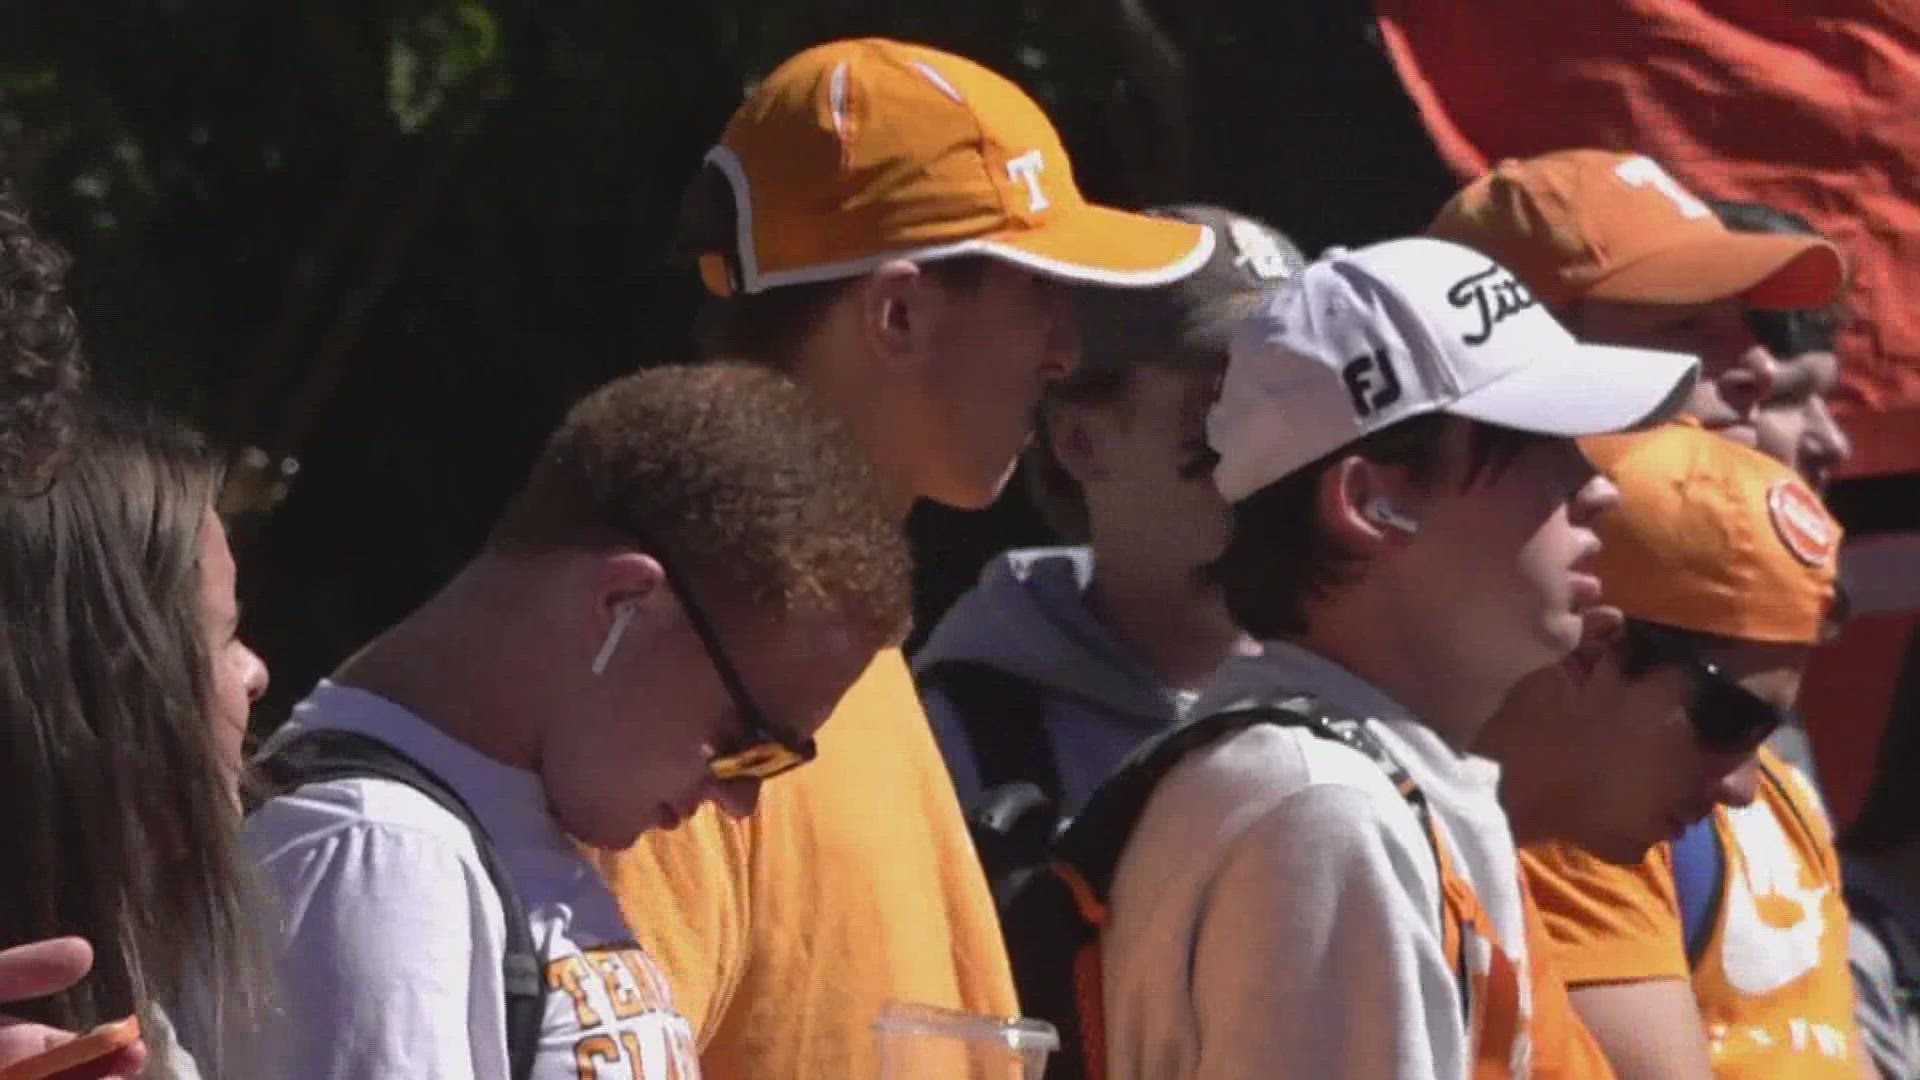 On Friday, fans gathered and prepared for the Vols to take on the Gators in Neyland Stadium.